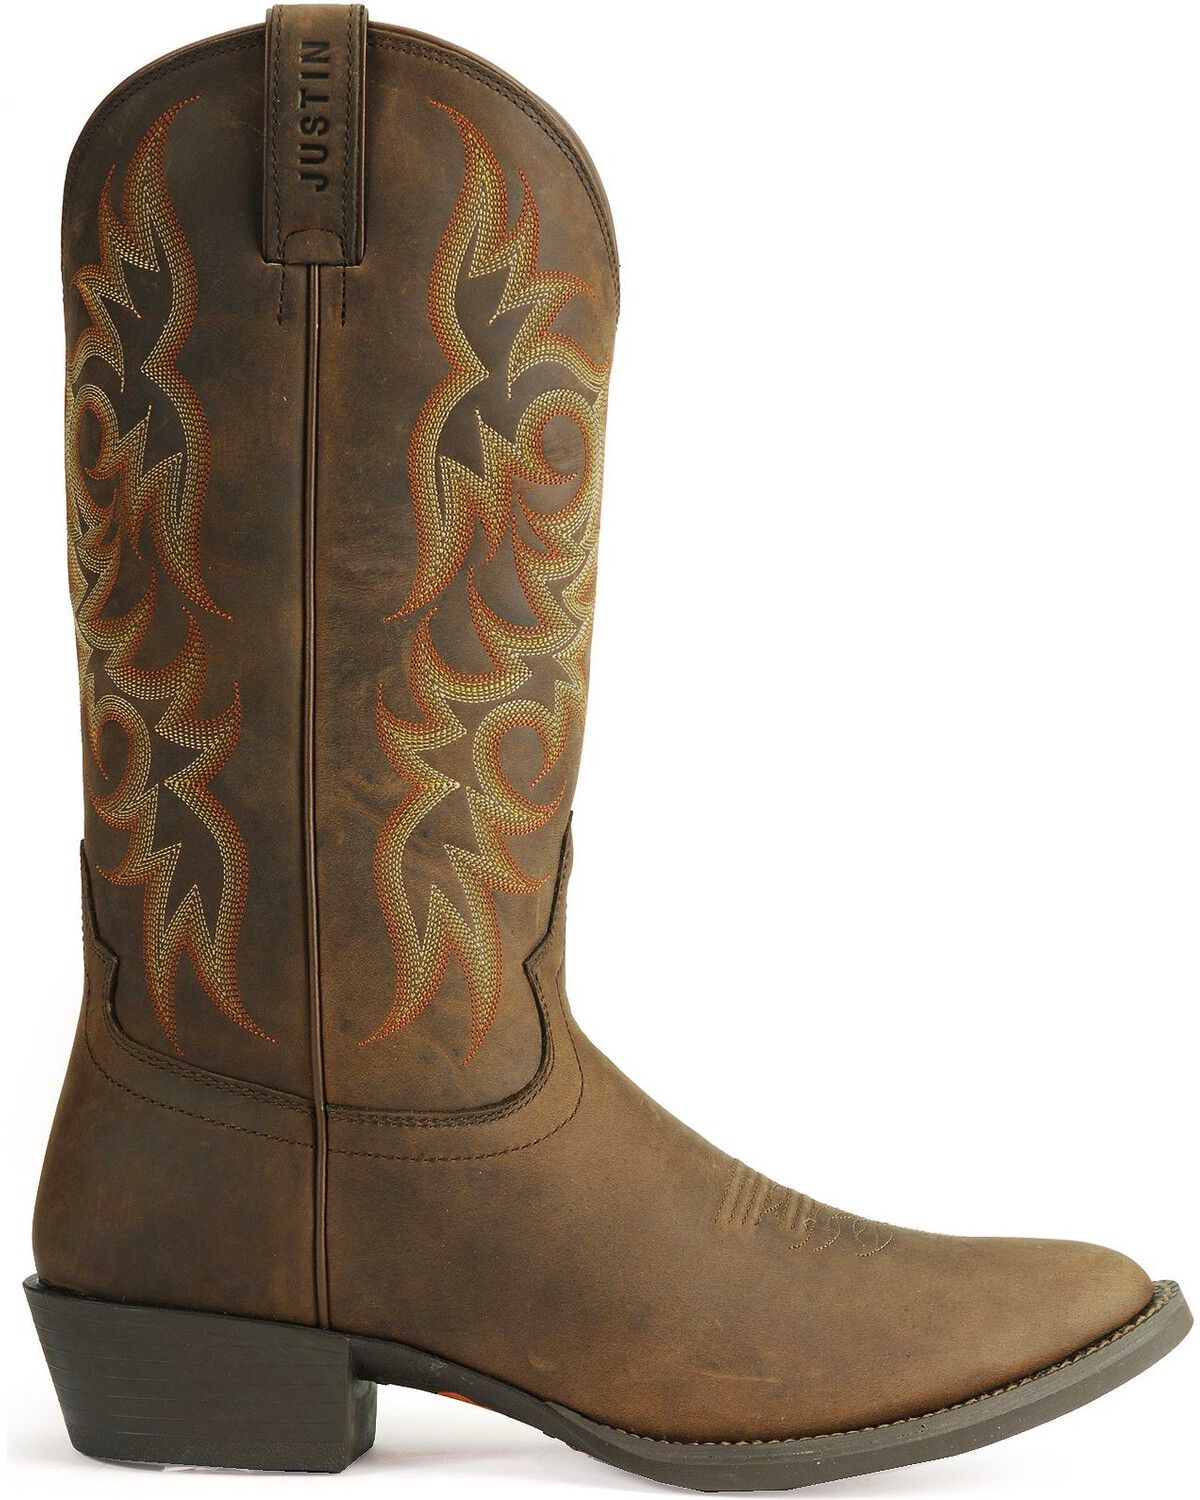 justin boots 2551